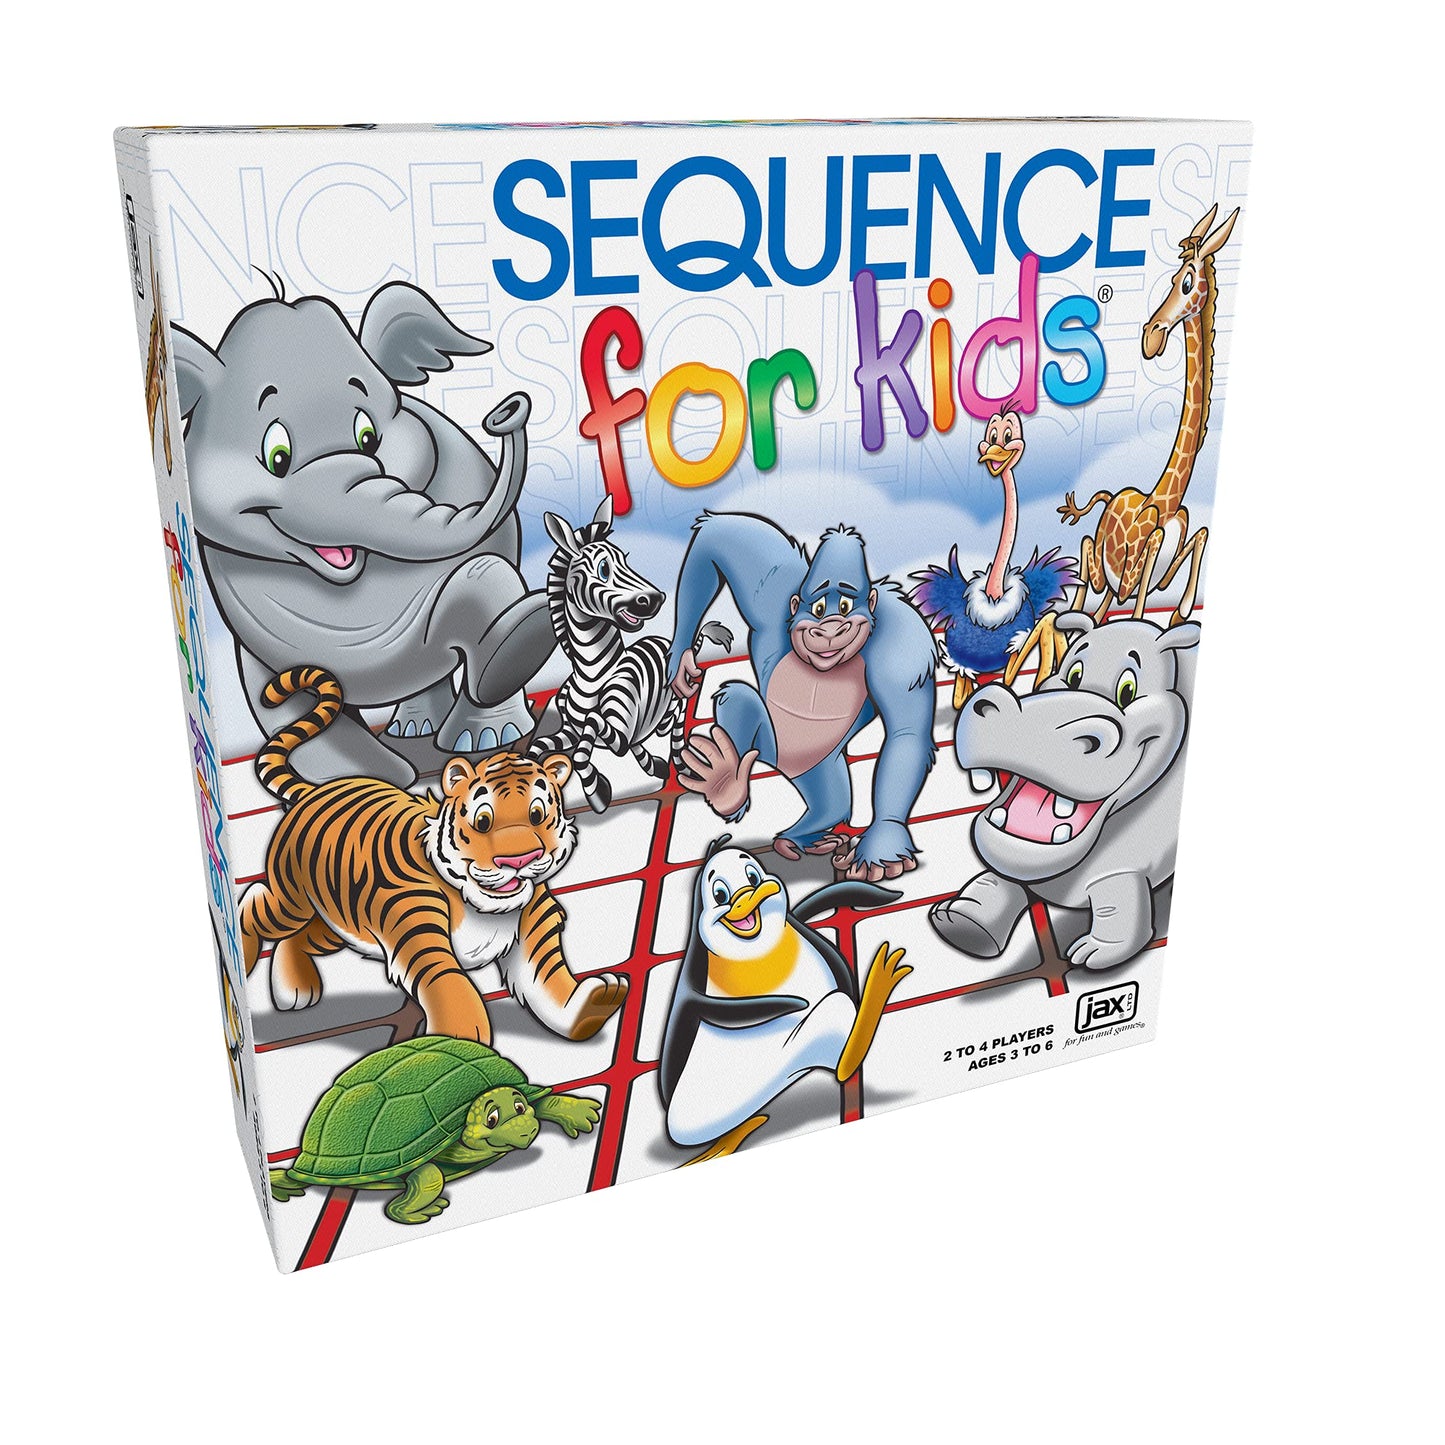 SEQUENCE for Kids -- The 'No Reading Required' Strategy Game by Jax and Goliath, Multi Color, 11 inches (2-4 players) (Packaging May Vary)